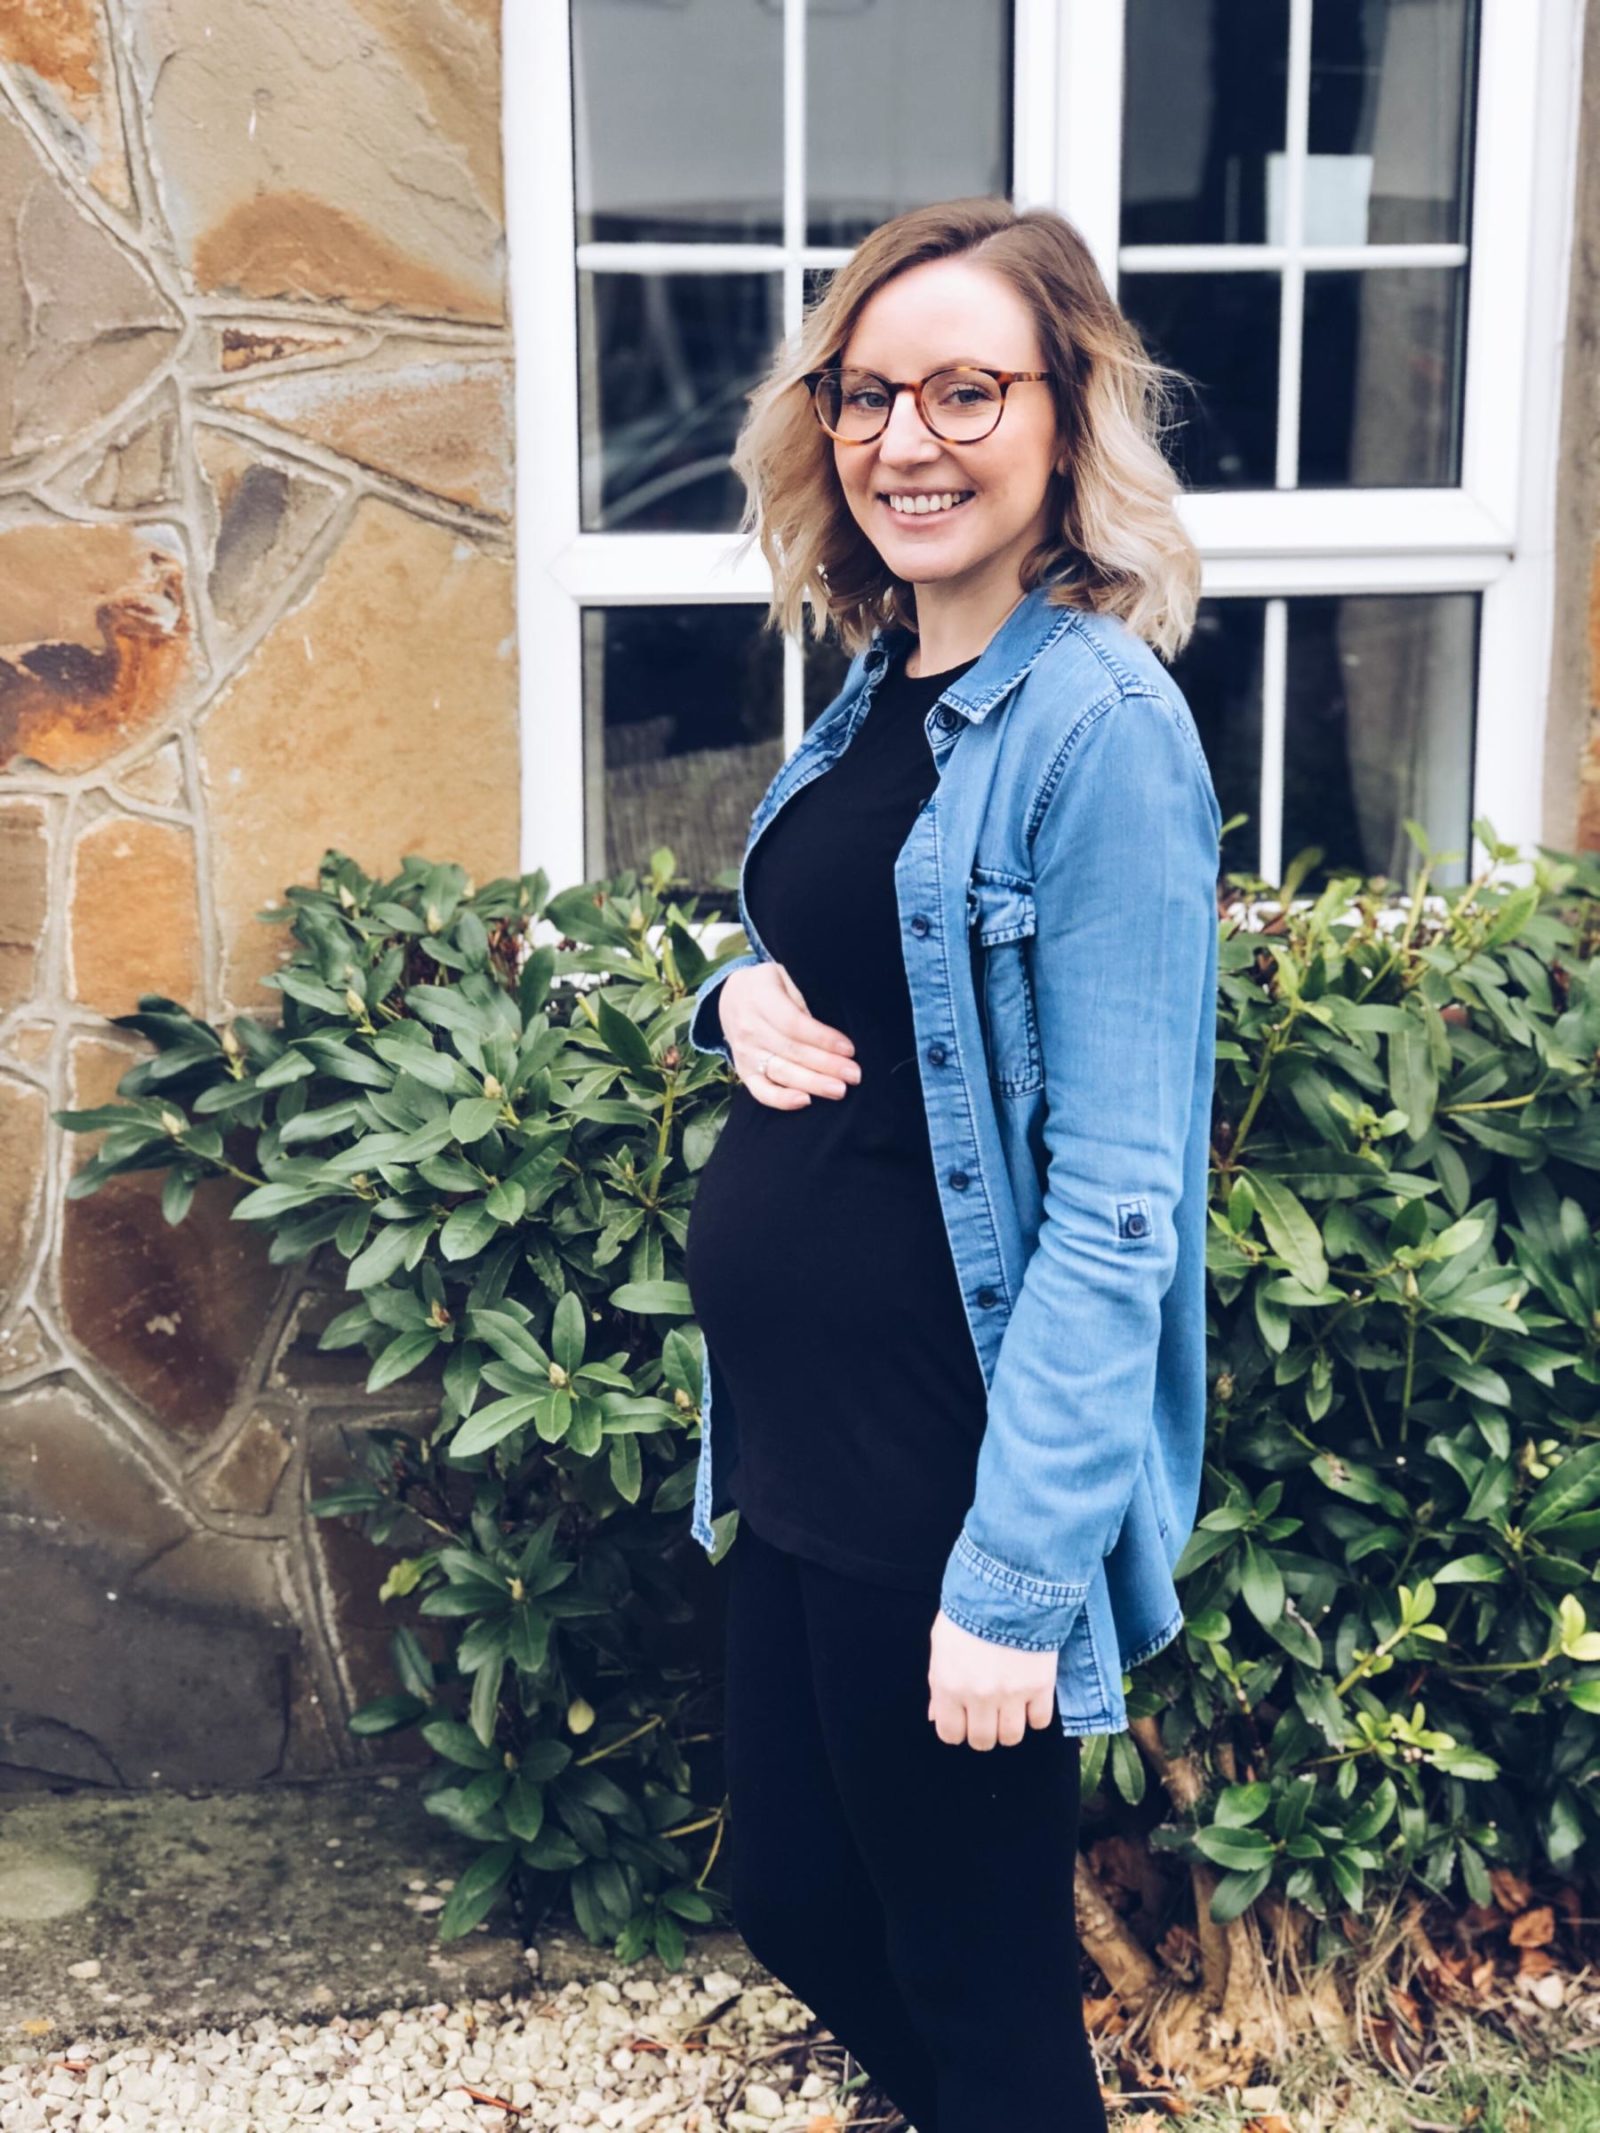 Bump update, pregnancy diaries, pregnancy update, pregnancy ball, birthing ball, labour, second trimester, morning sickness, pregnancy cravings, baby movements, pregnancy insomnia, pregnancy routine, positive pregnancy story, 